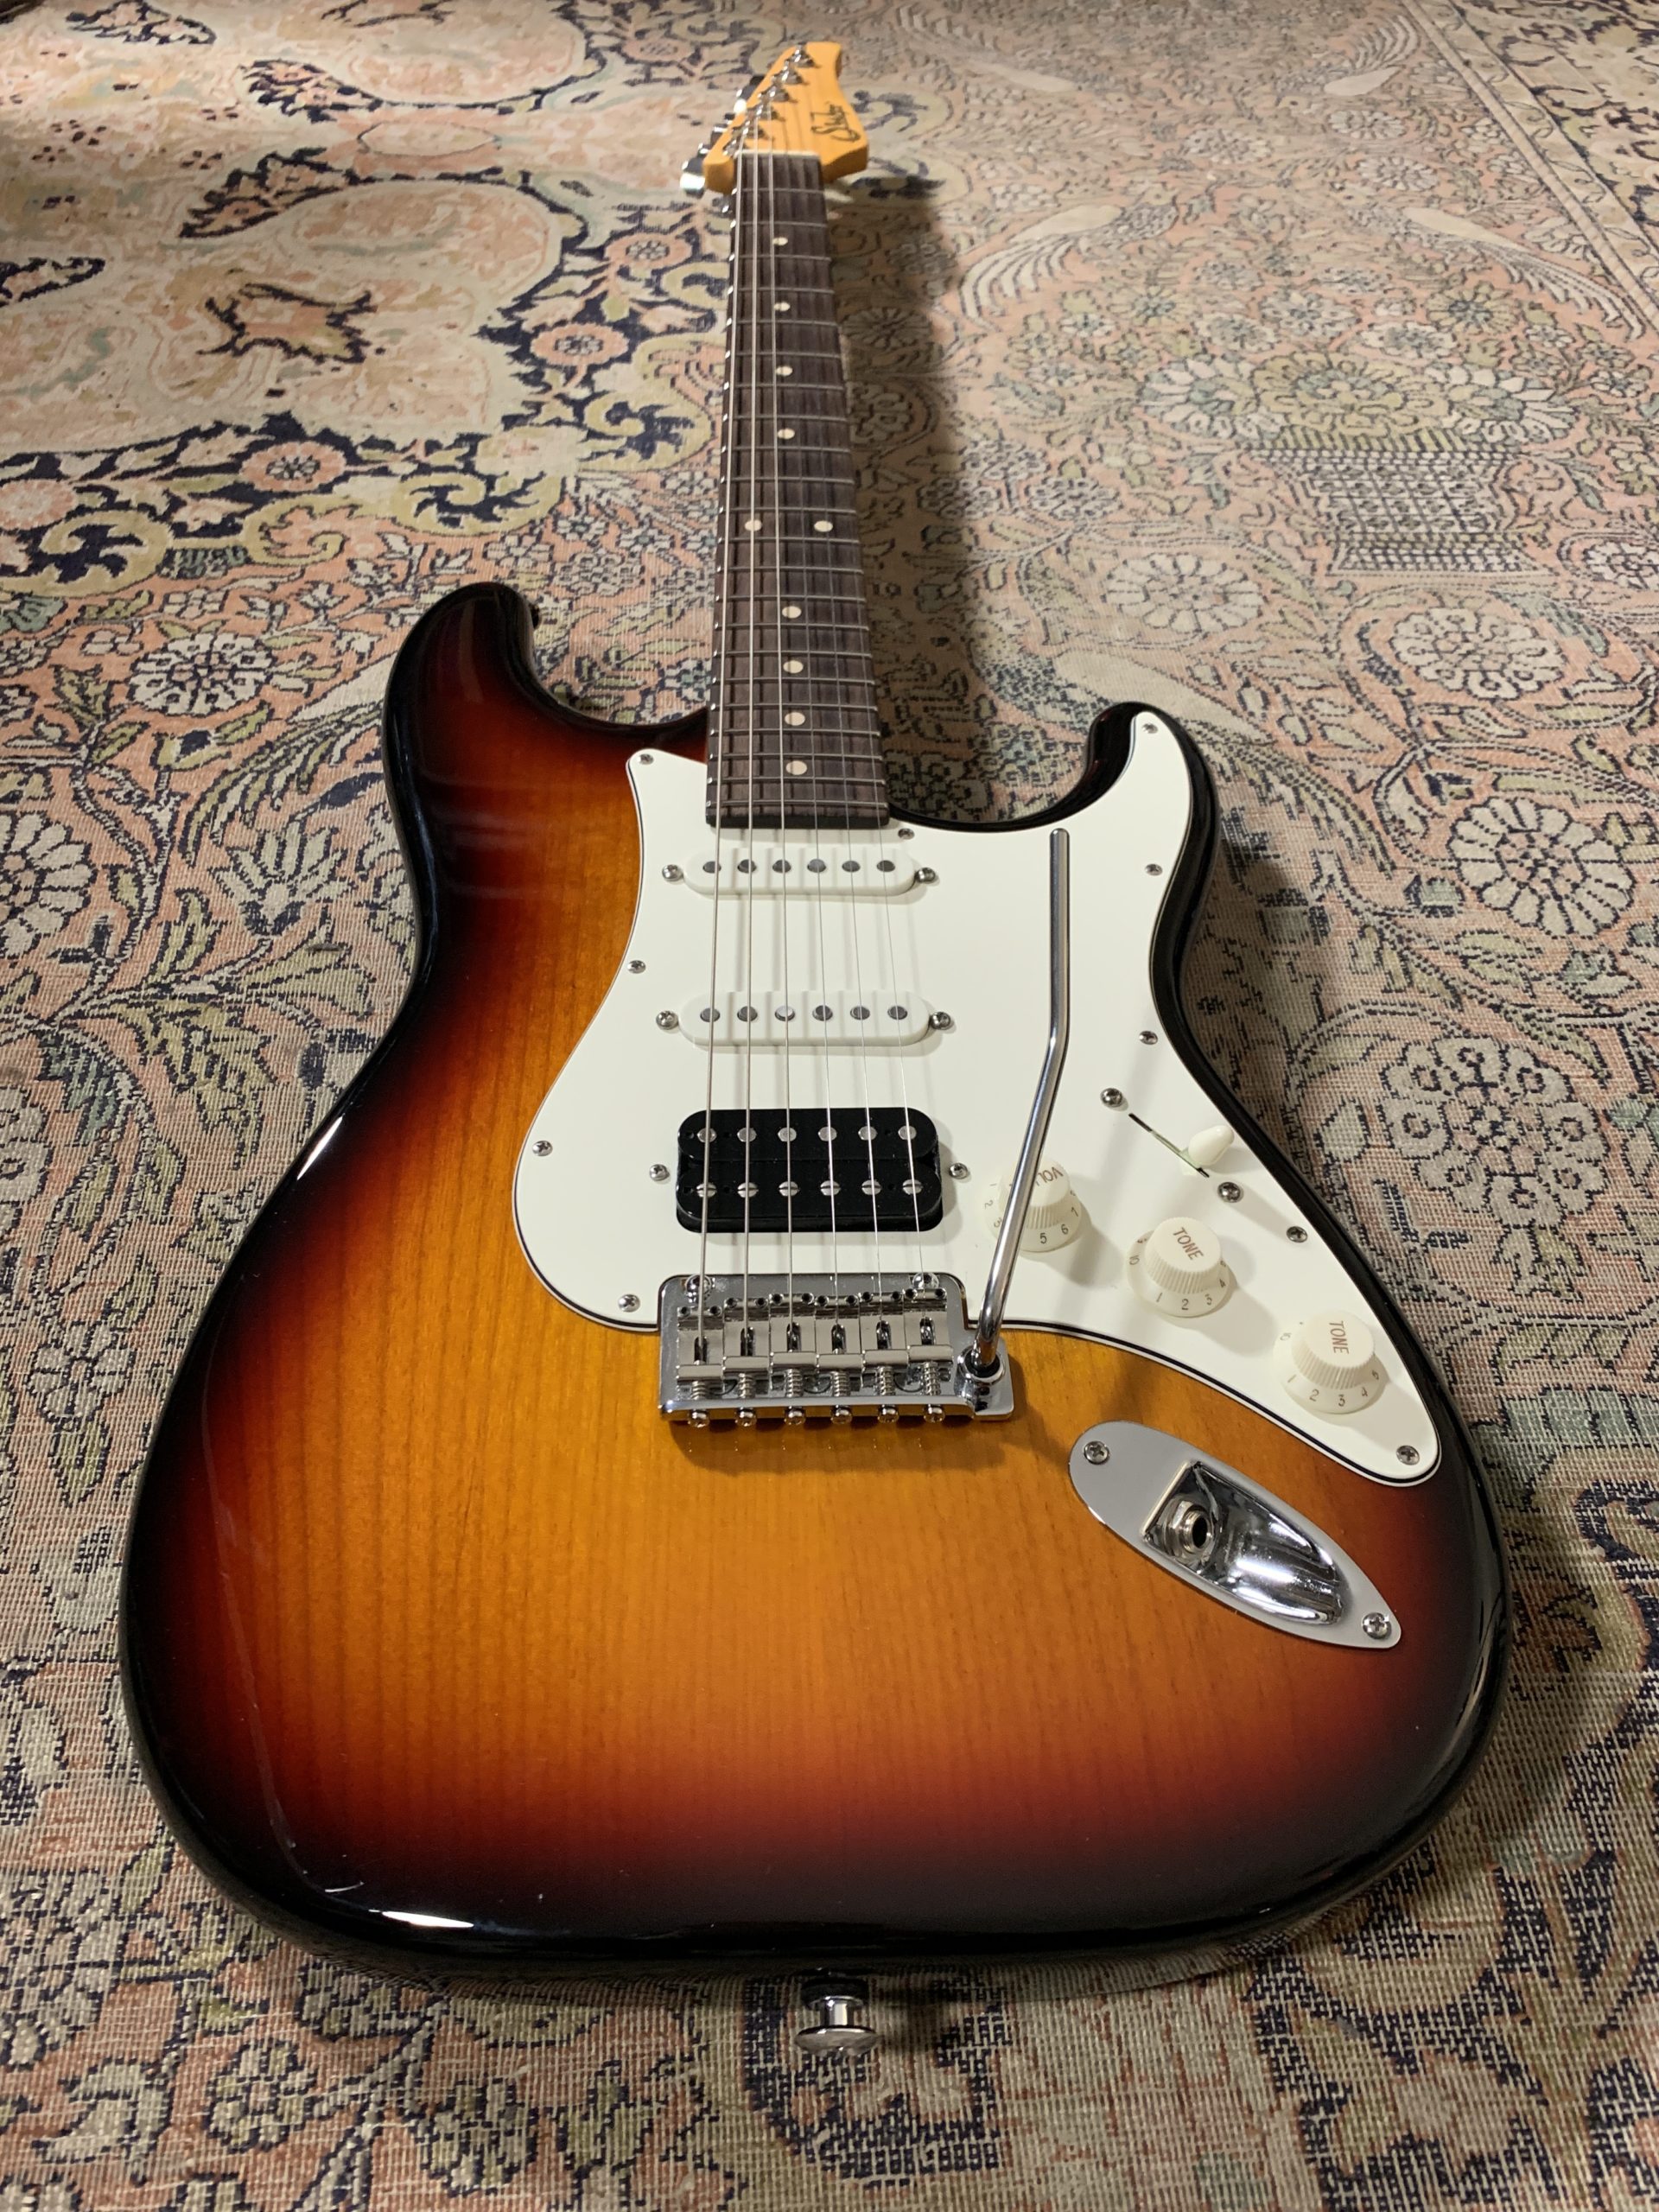 Classic S Suhr, the best American Super Strat today